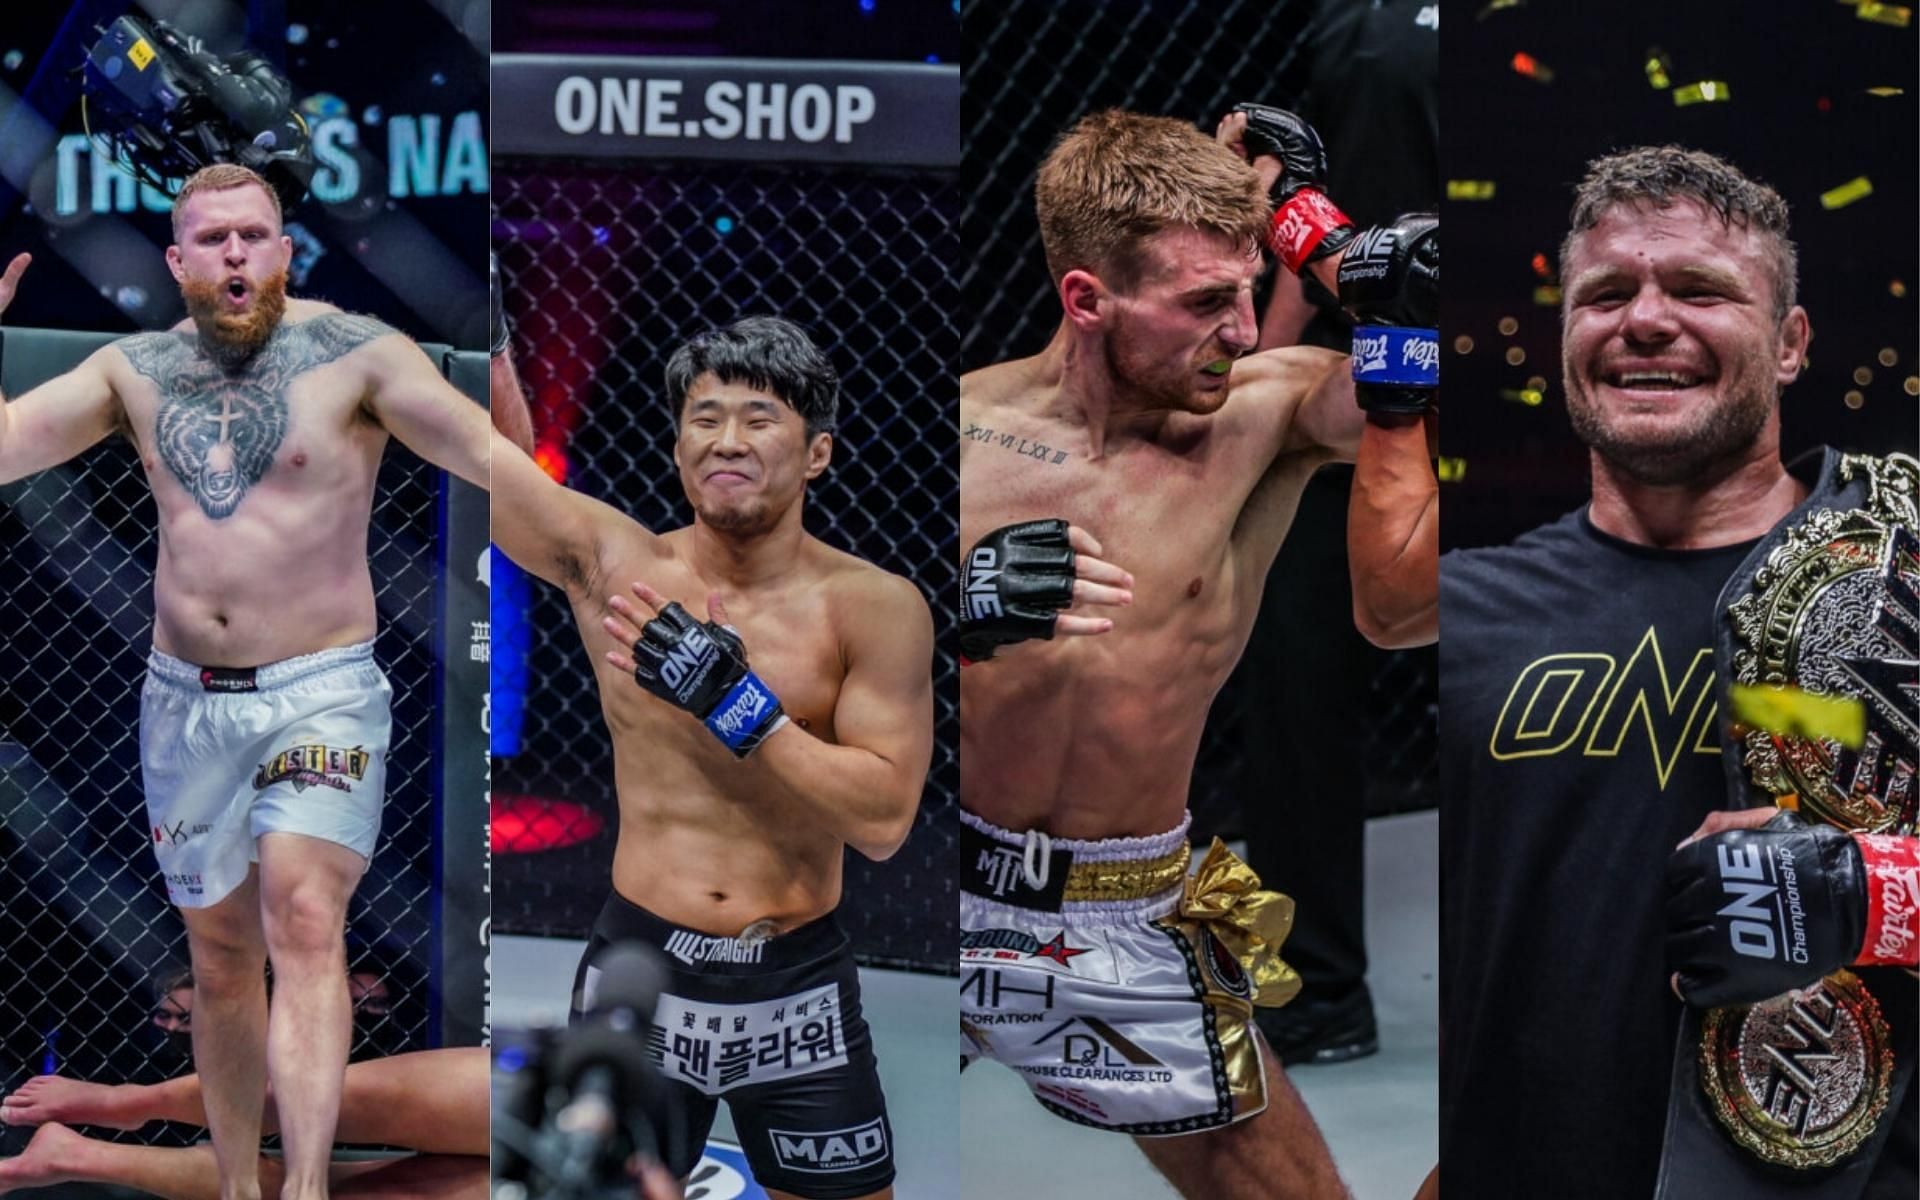 (From left to right) Odie Delaney, Woo Sung Hoon, Jonathan Haggerty, and Anatoly Malykhin all deserve praise for their performances at ONE Championship: Bad Blood. (Images courtesy of ONE Championship)